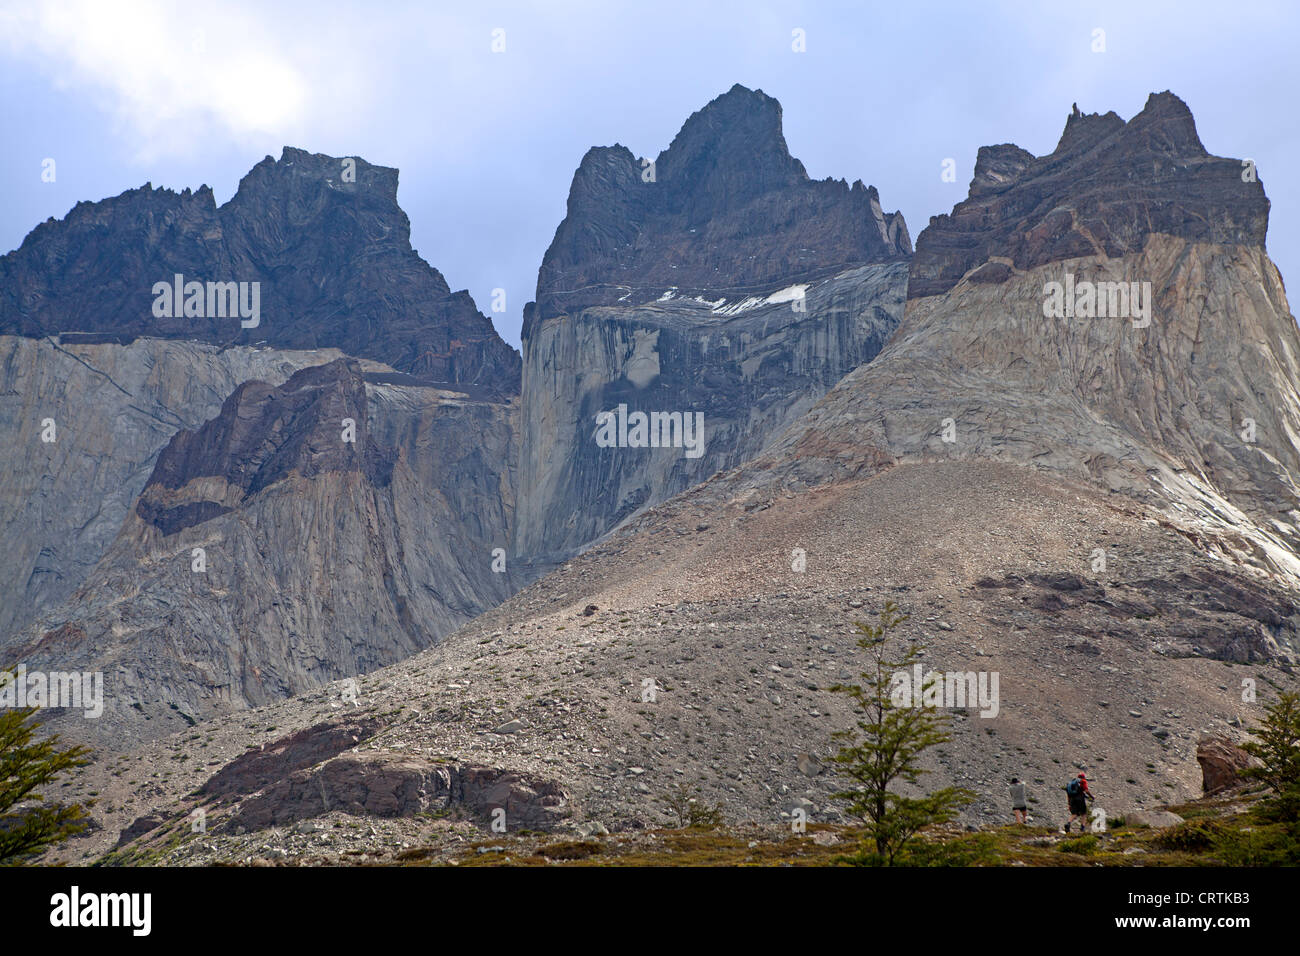 The cuernos peaks in Torres del Paine National Park Stock Photo